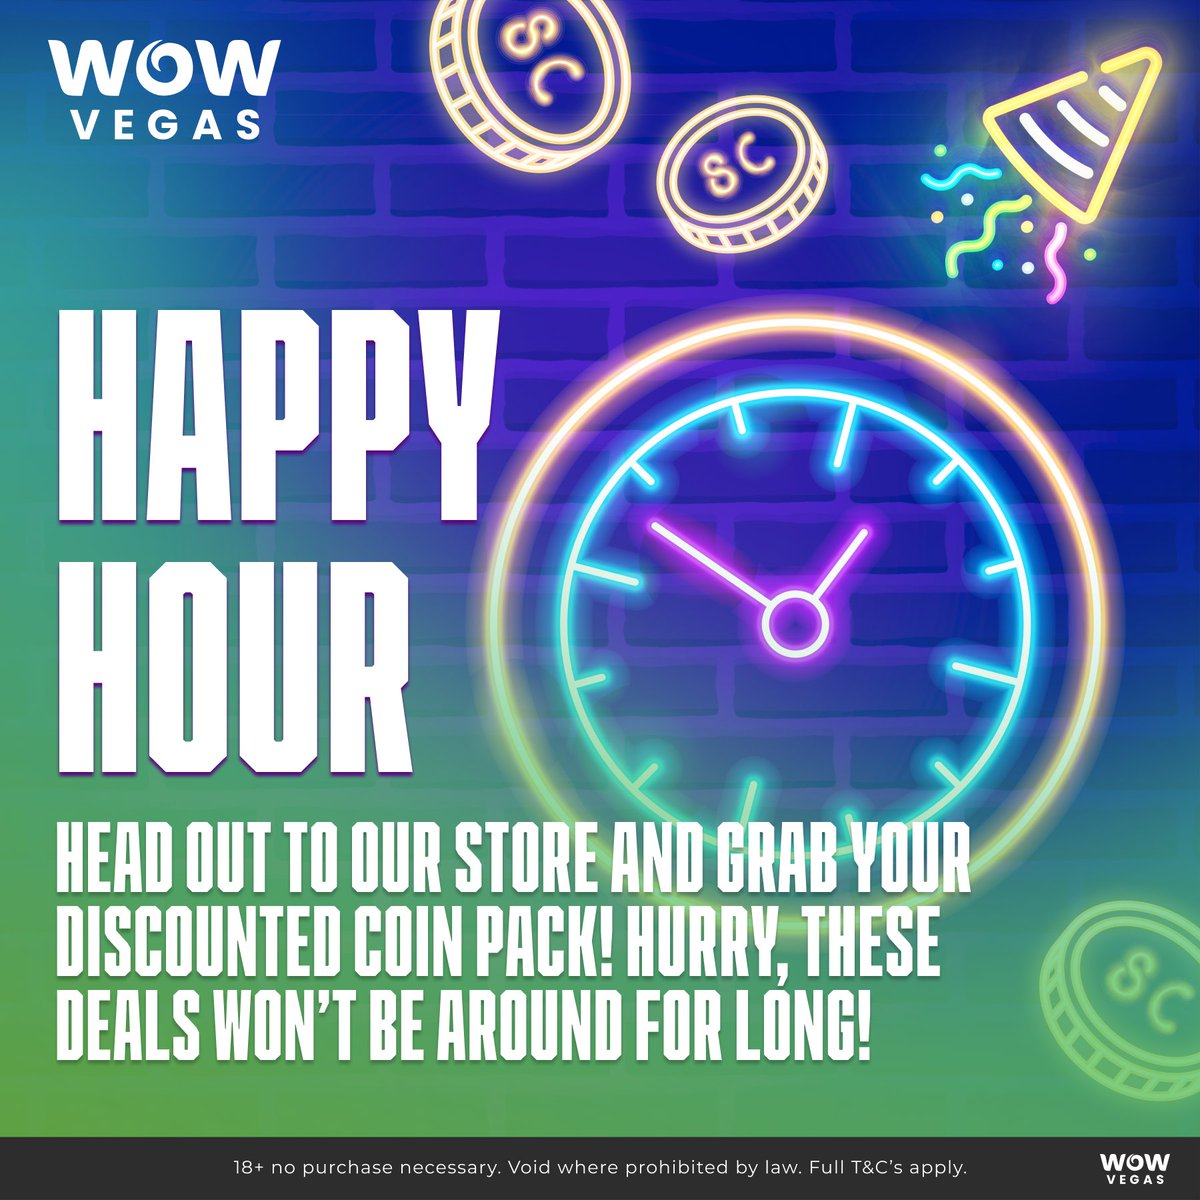 🚨 Don't Miss Out on Happy Hour Savings! 🚀 Score big discounts on coin packages for the next two hours only! One per customer! 🎉 Join us between 6-8 pm ET or 3-5 pm PT to grab your share of the savings at WOW Vegas. Time's ticking, don't delay! ⏳